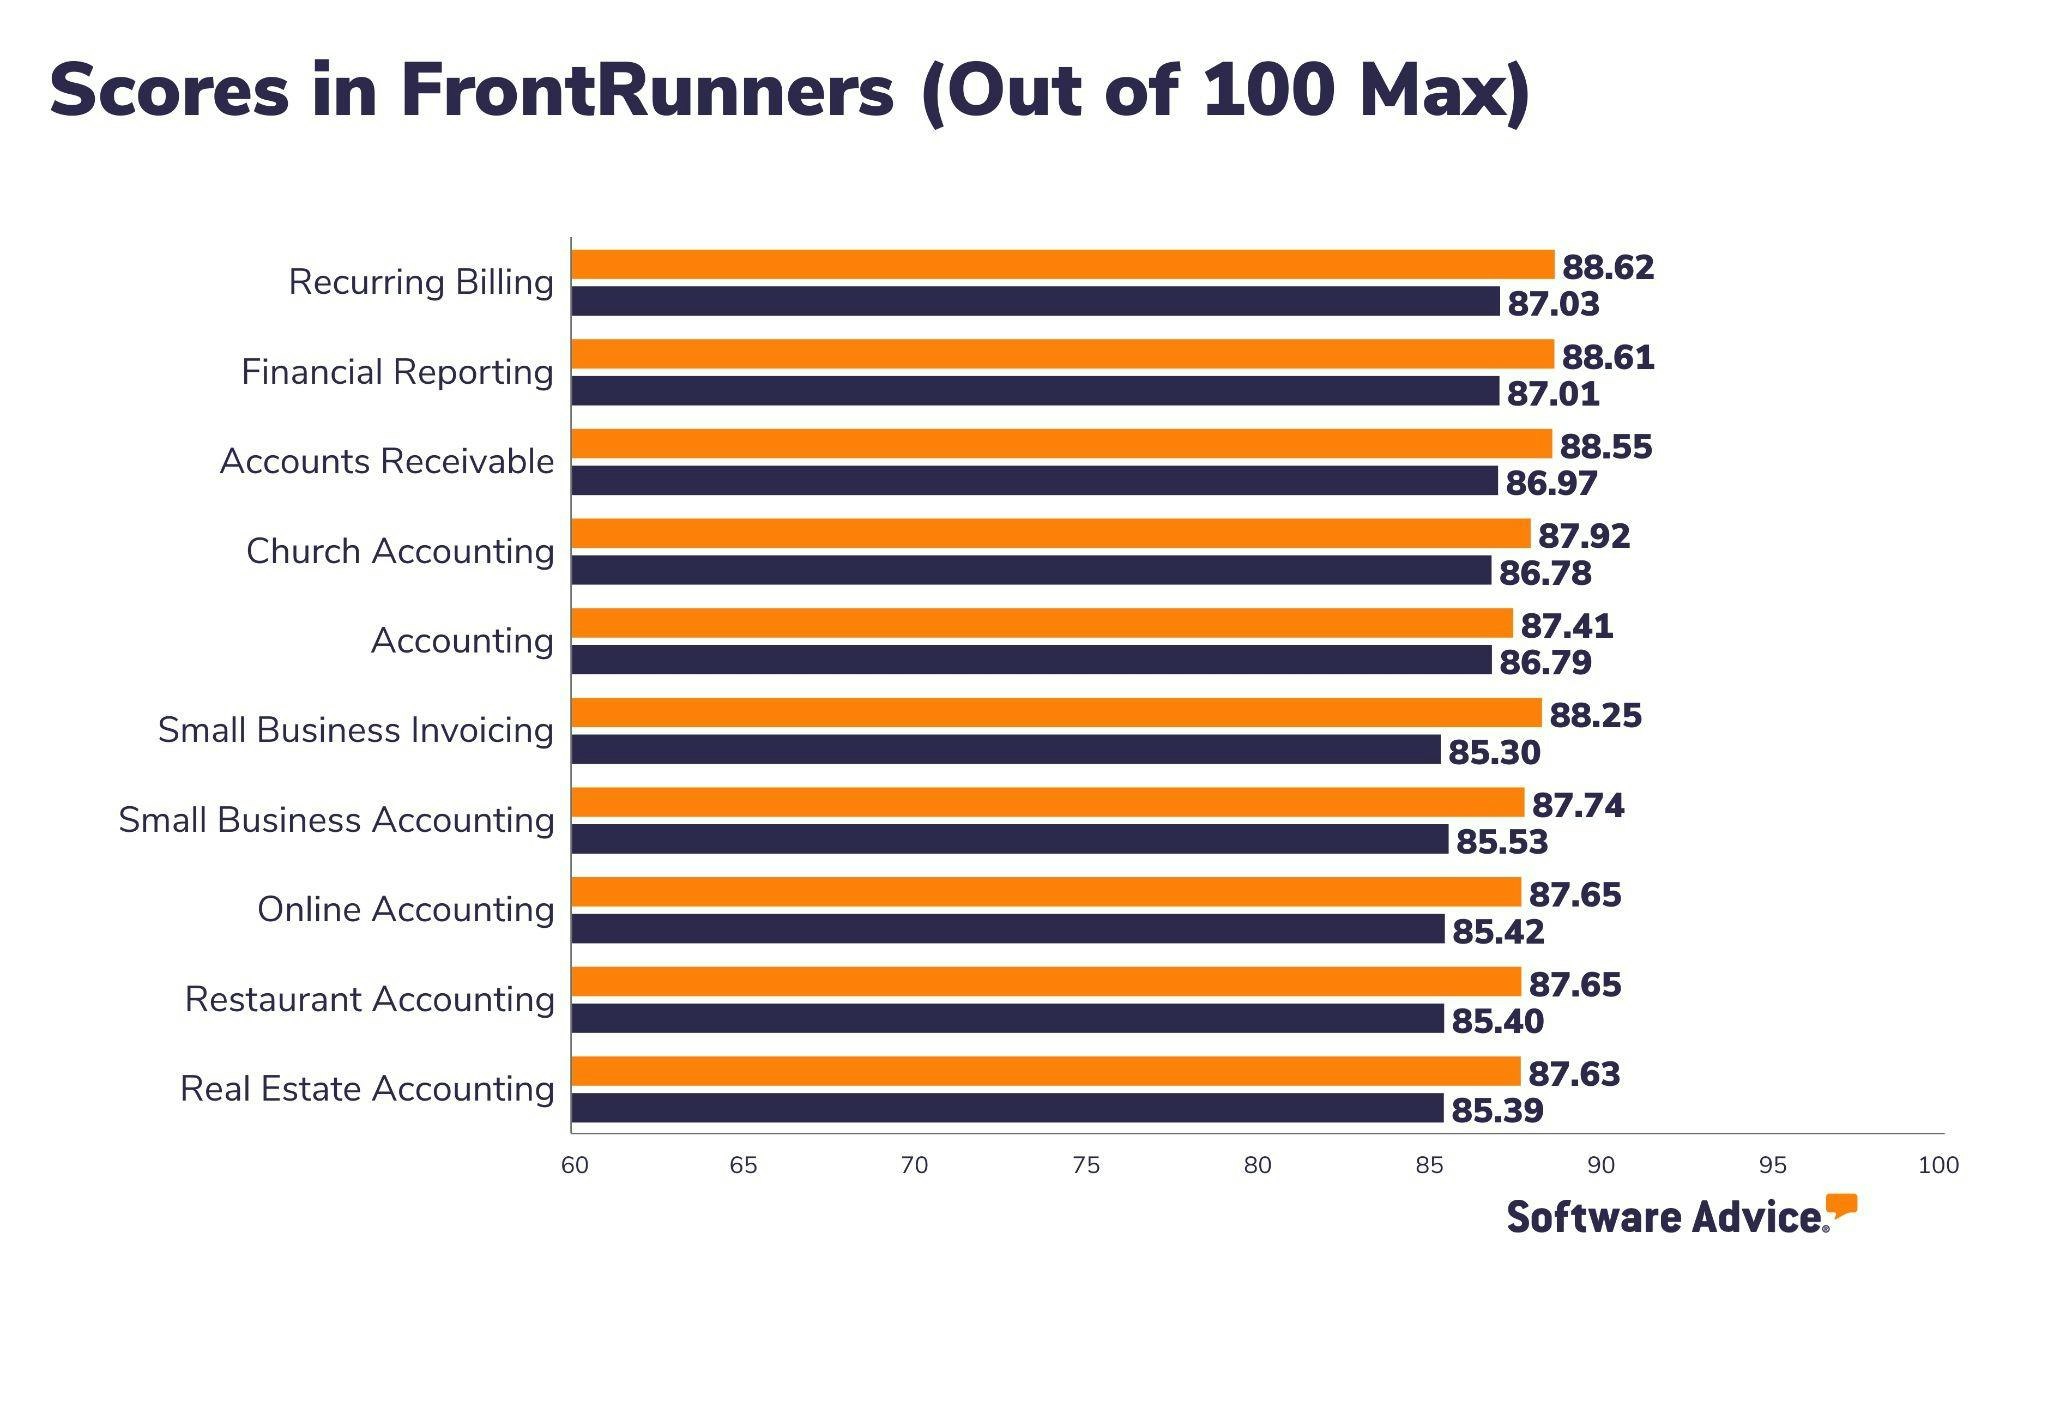 Wave-Accounting-Software-Advice-FrontRunners-Snapshot